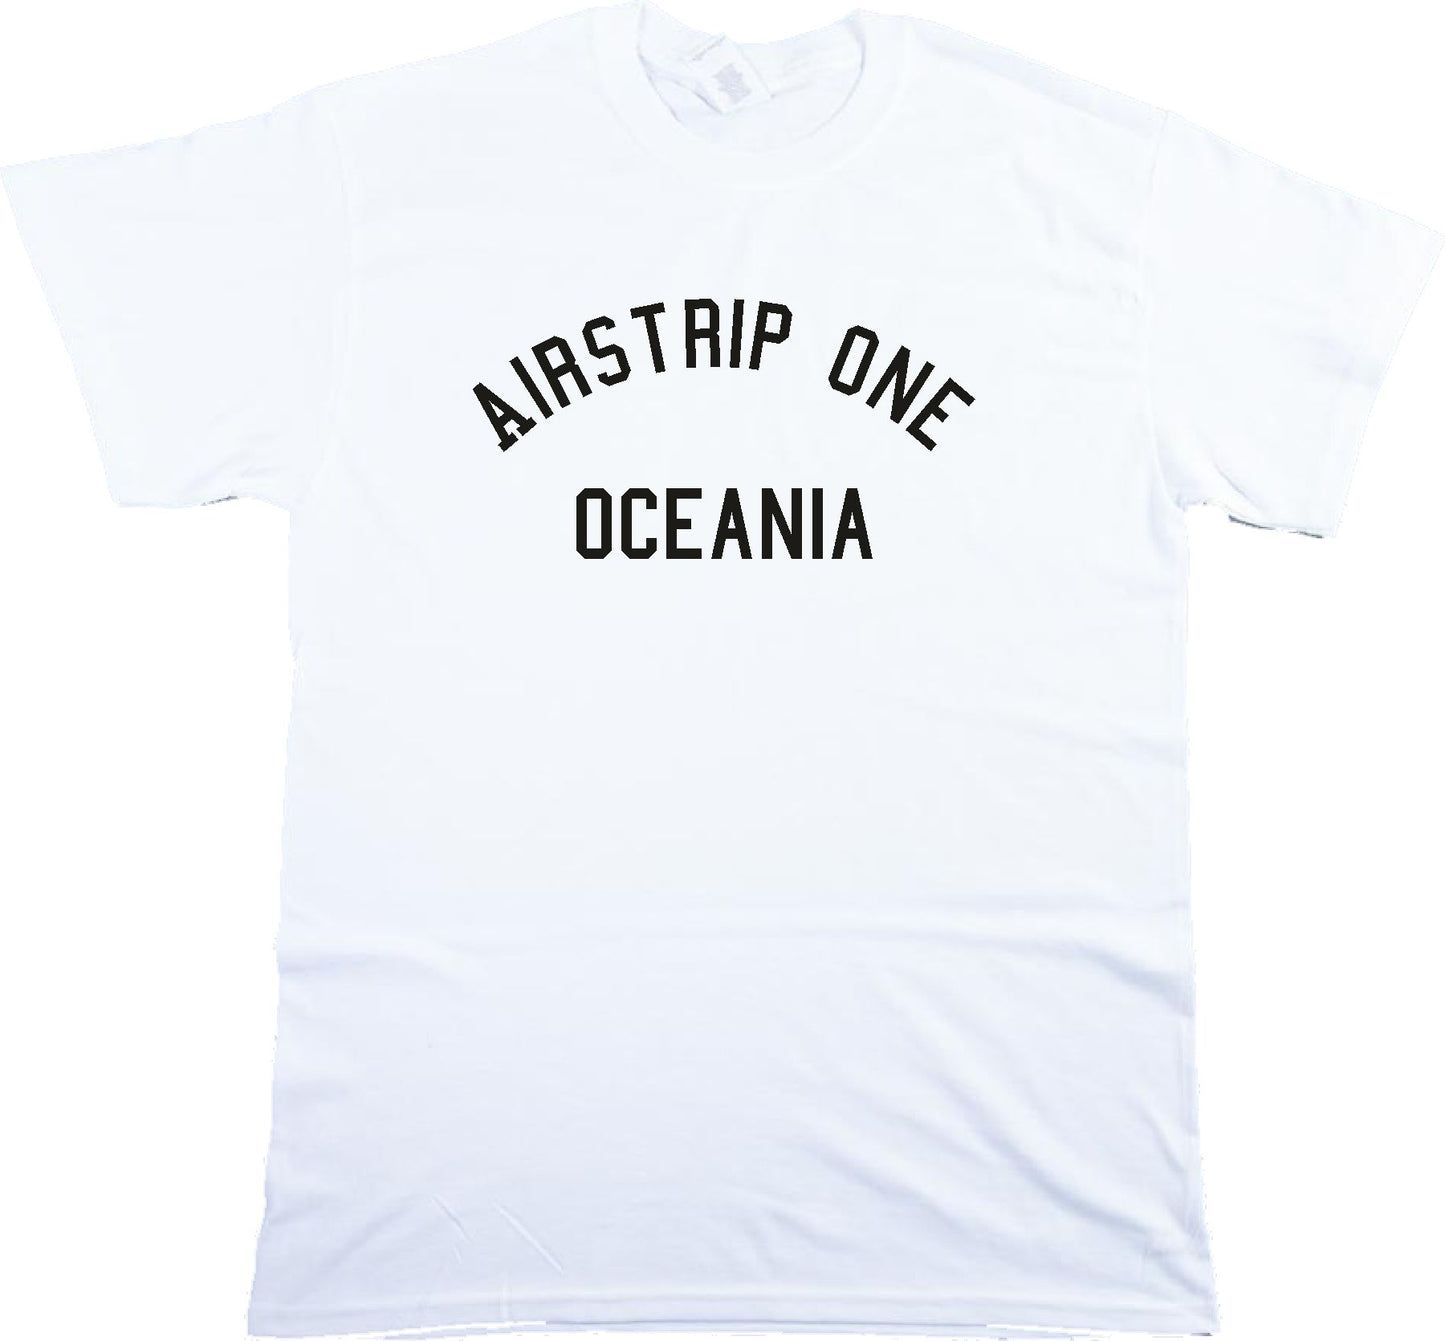 Airstrip One, Oceana T-Shirt - 1984, George Orwell, Various Colours